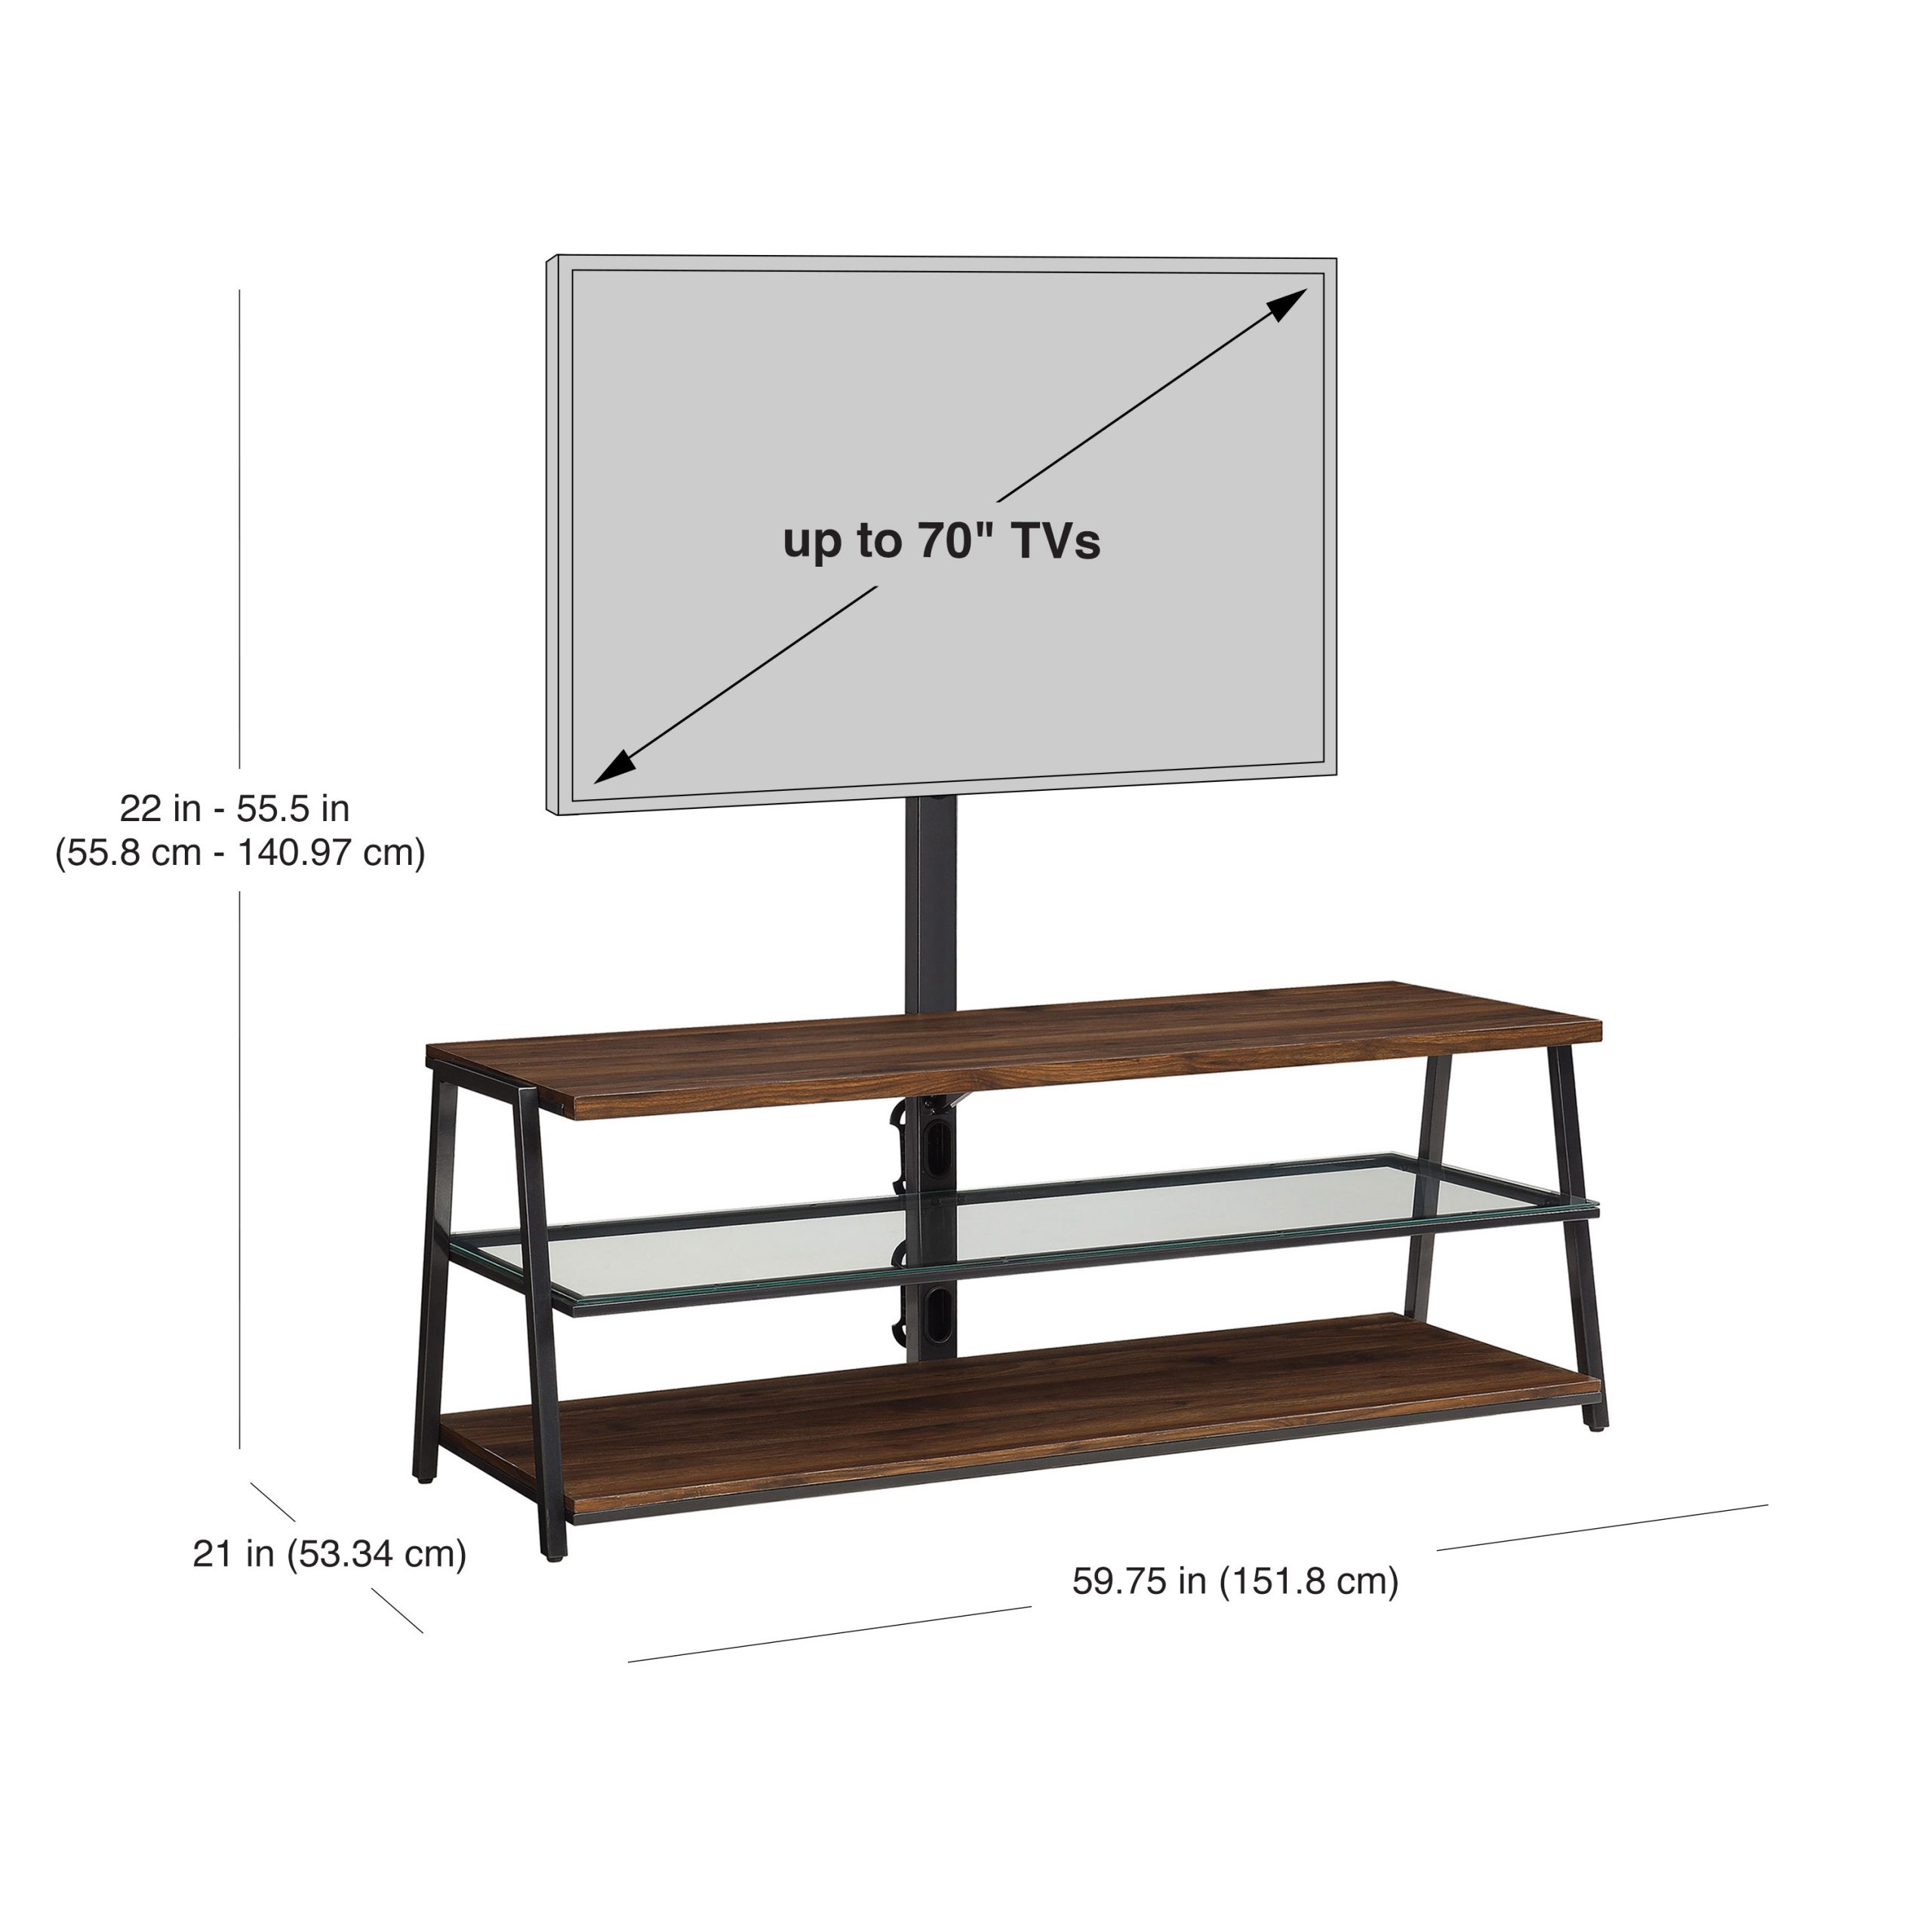 Mainstays Arris TV Stand MS17-D4-1011-03 for sale online Medium Brown 